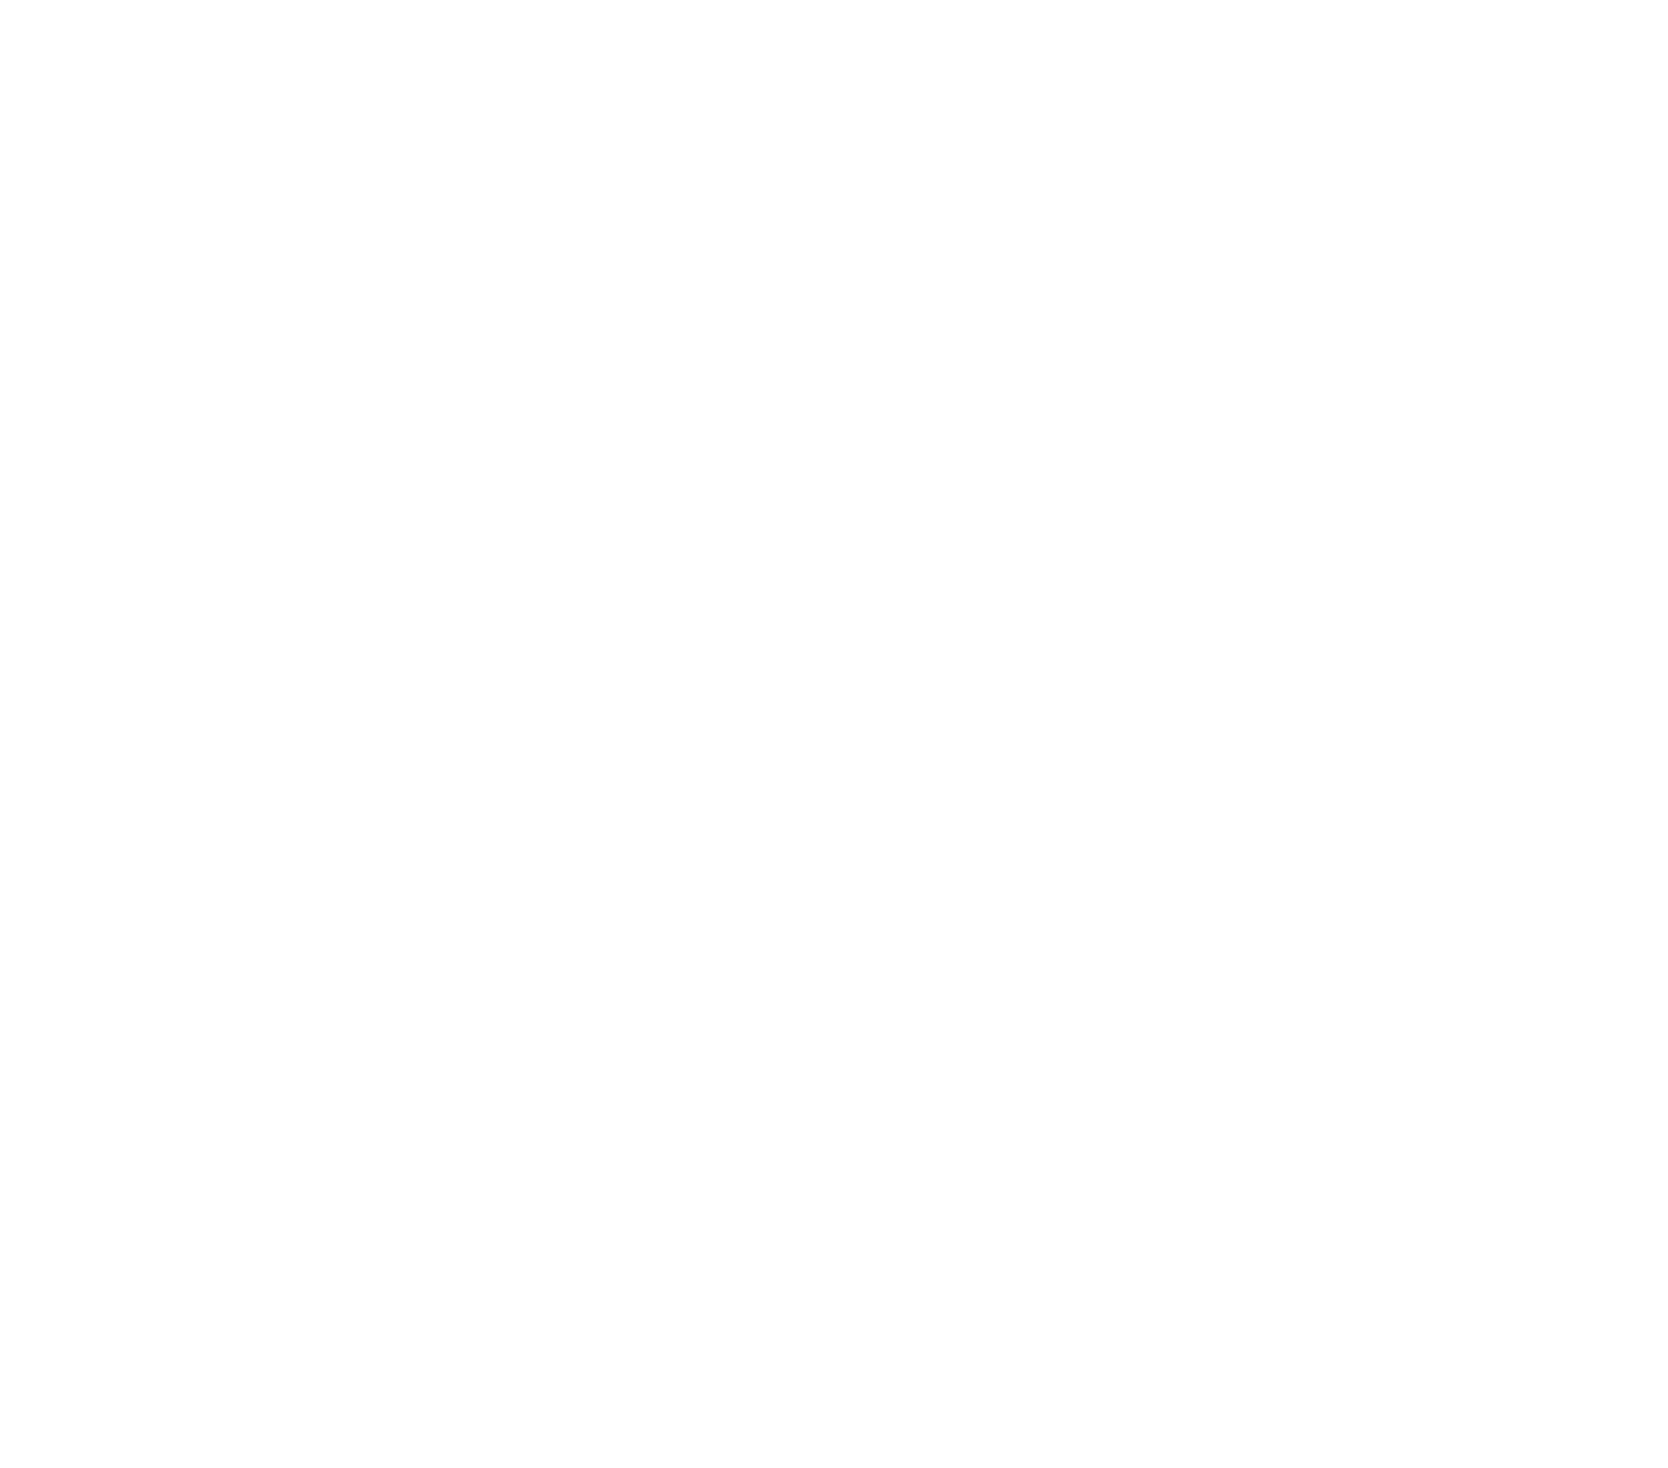 A White Shopping Cart With Black Background